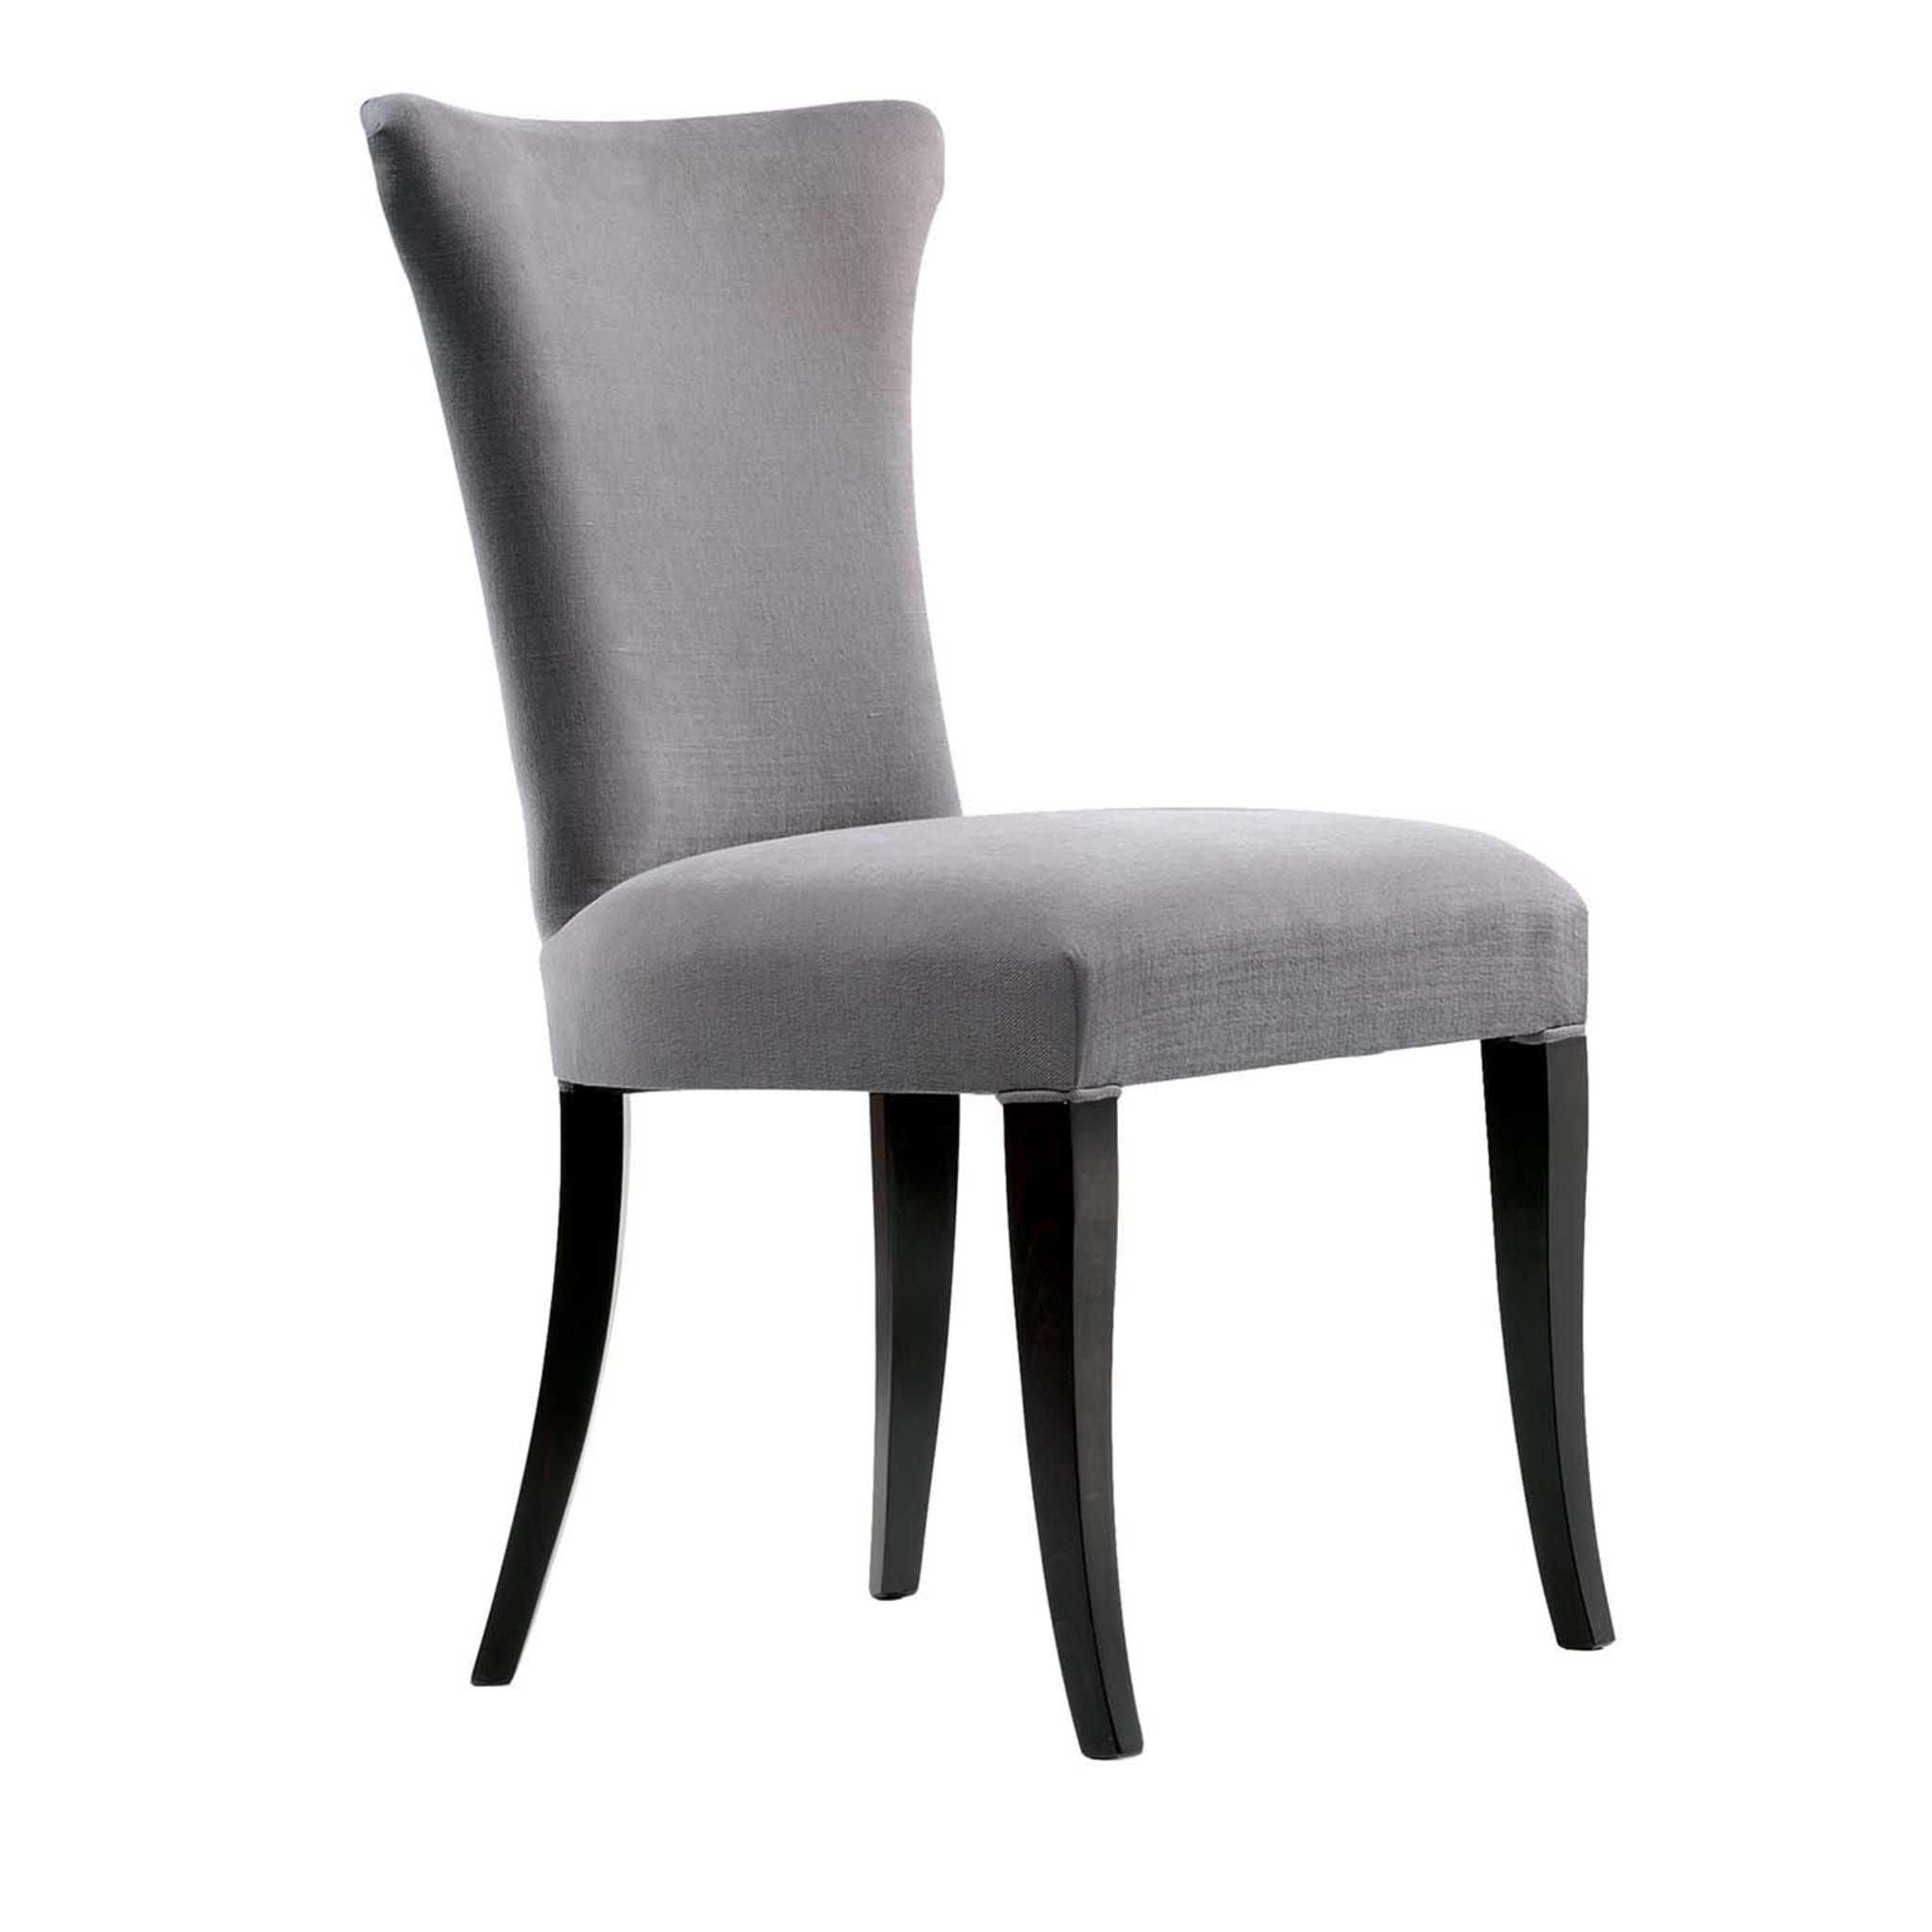 Solid Gray Dining Chair #10 - Main view